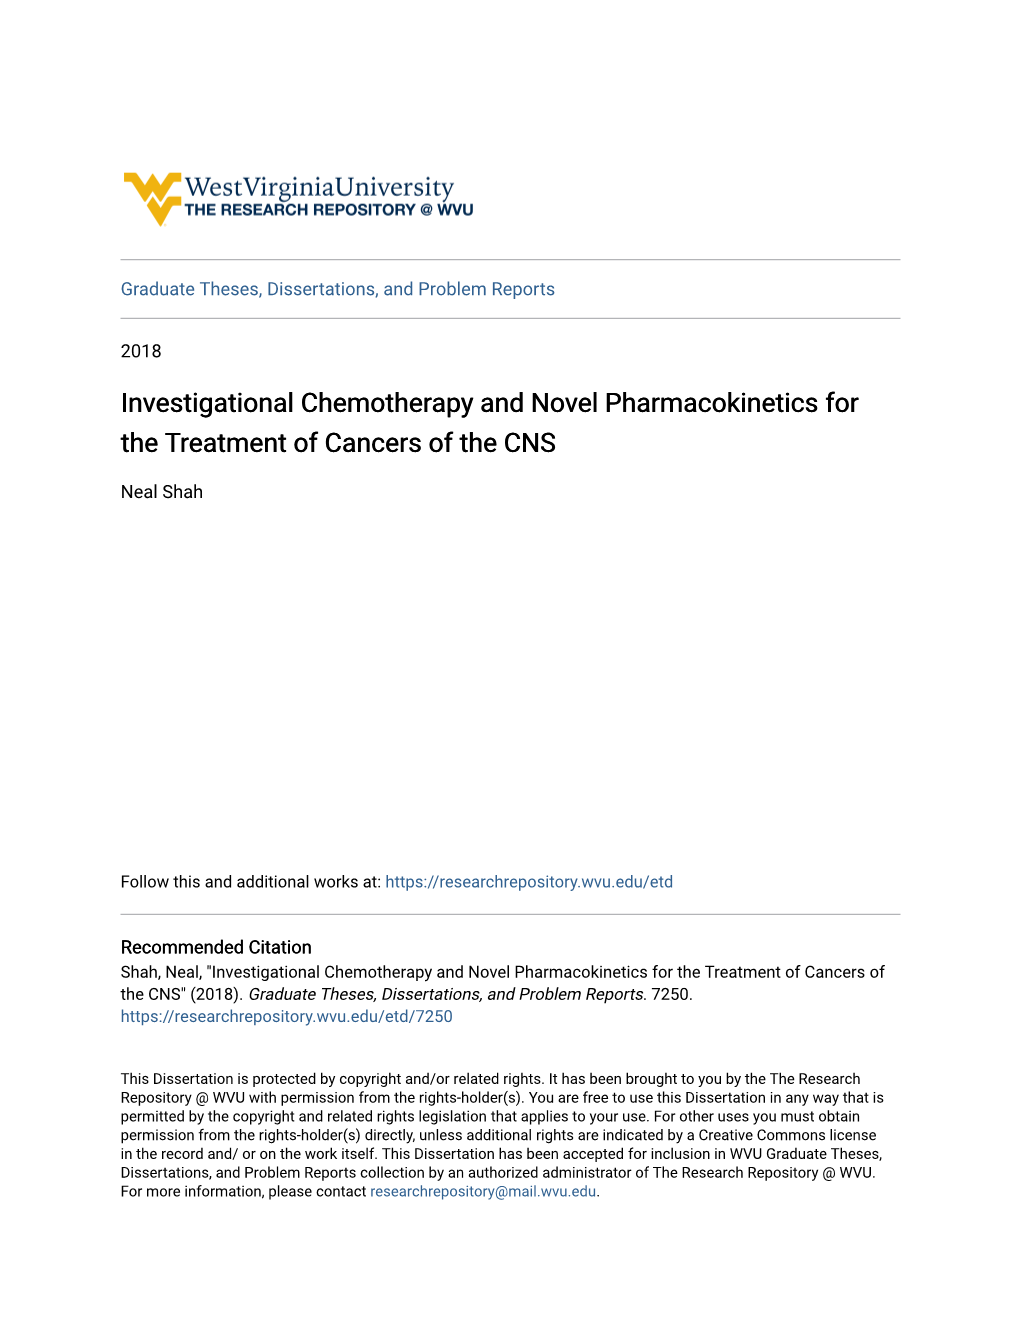 Investigational Chemotherapy and Novel Pharmacokinetics for the Treatment of Cancers of the CNS